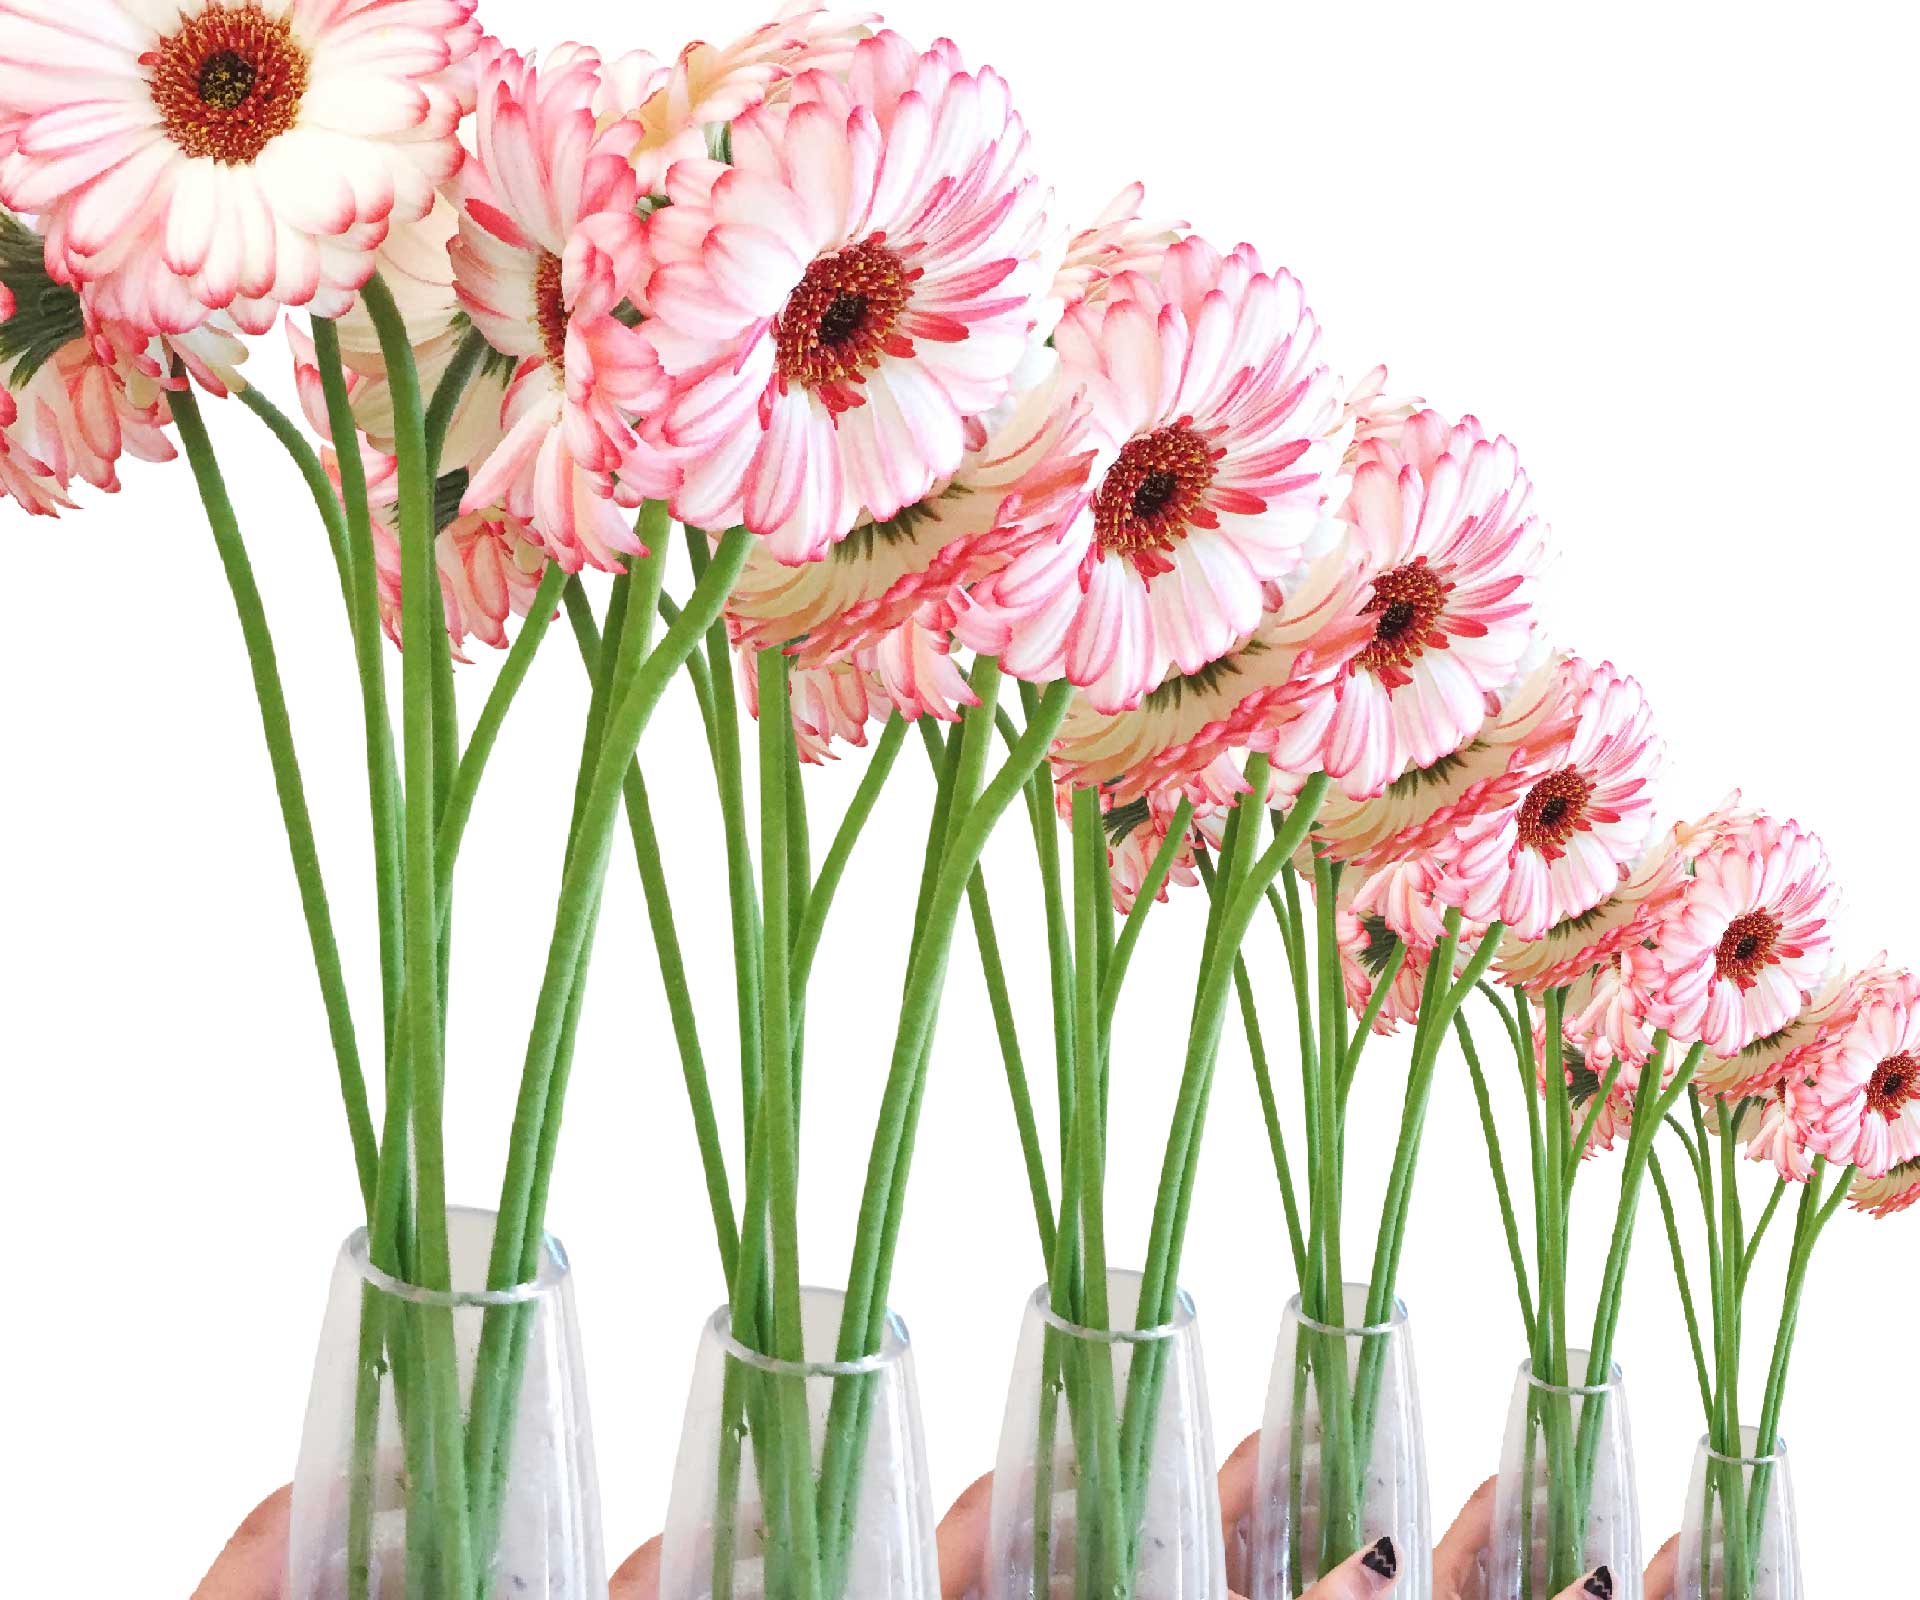 6 simple ways to make your flowers last longer